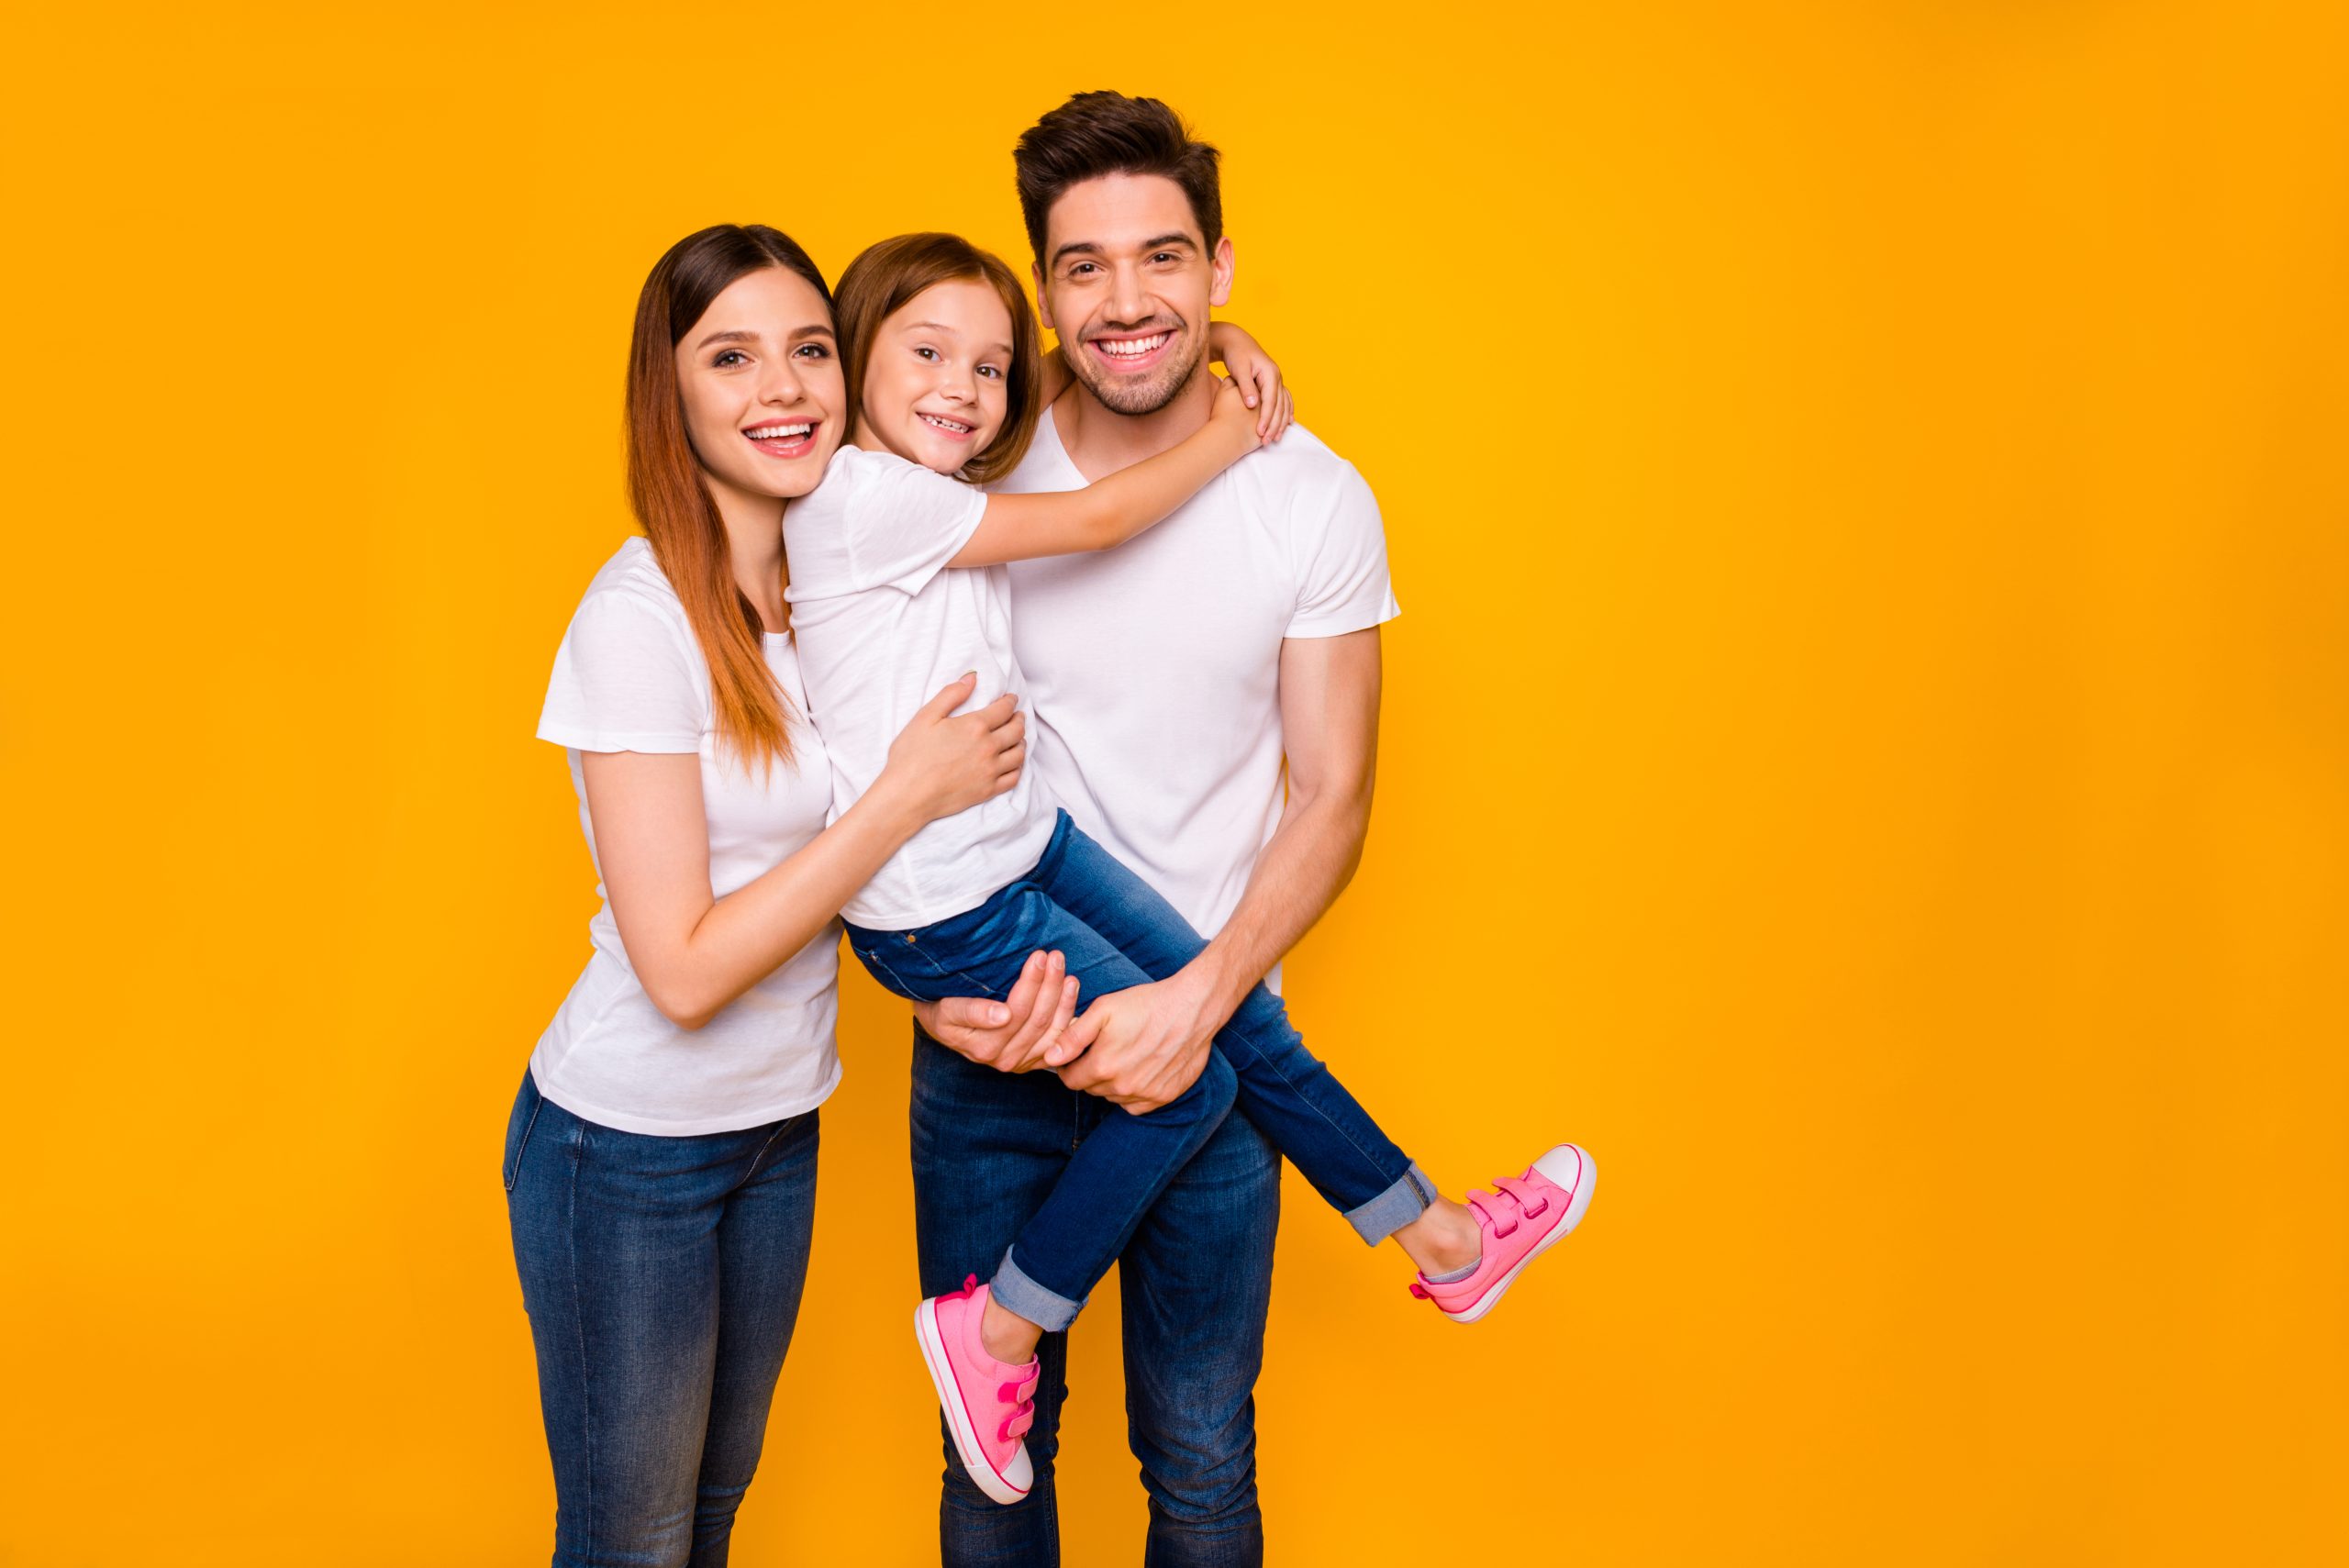 A family is posing for a photo. There is a mom, dad, and daughter all wearing white shirts and blue jeans. They are against a yellow background